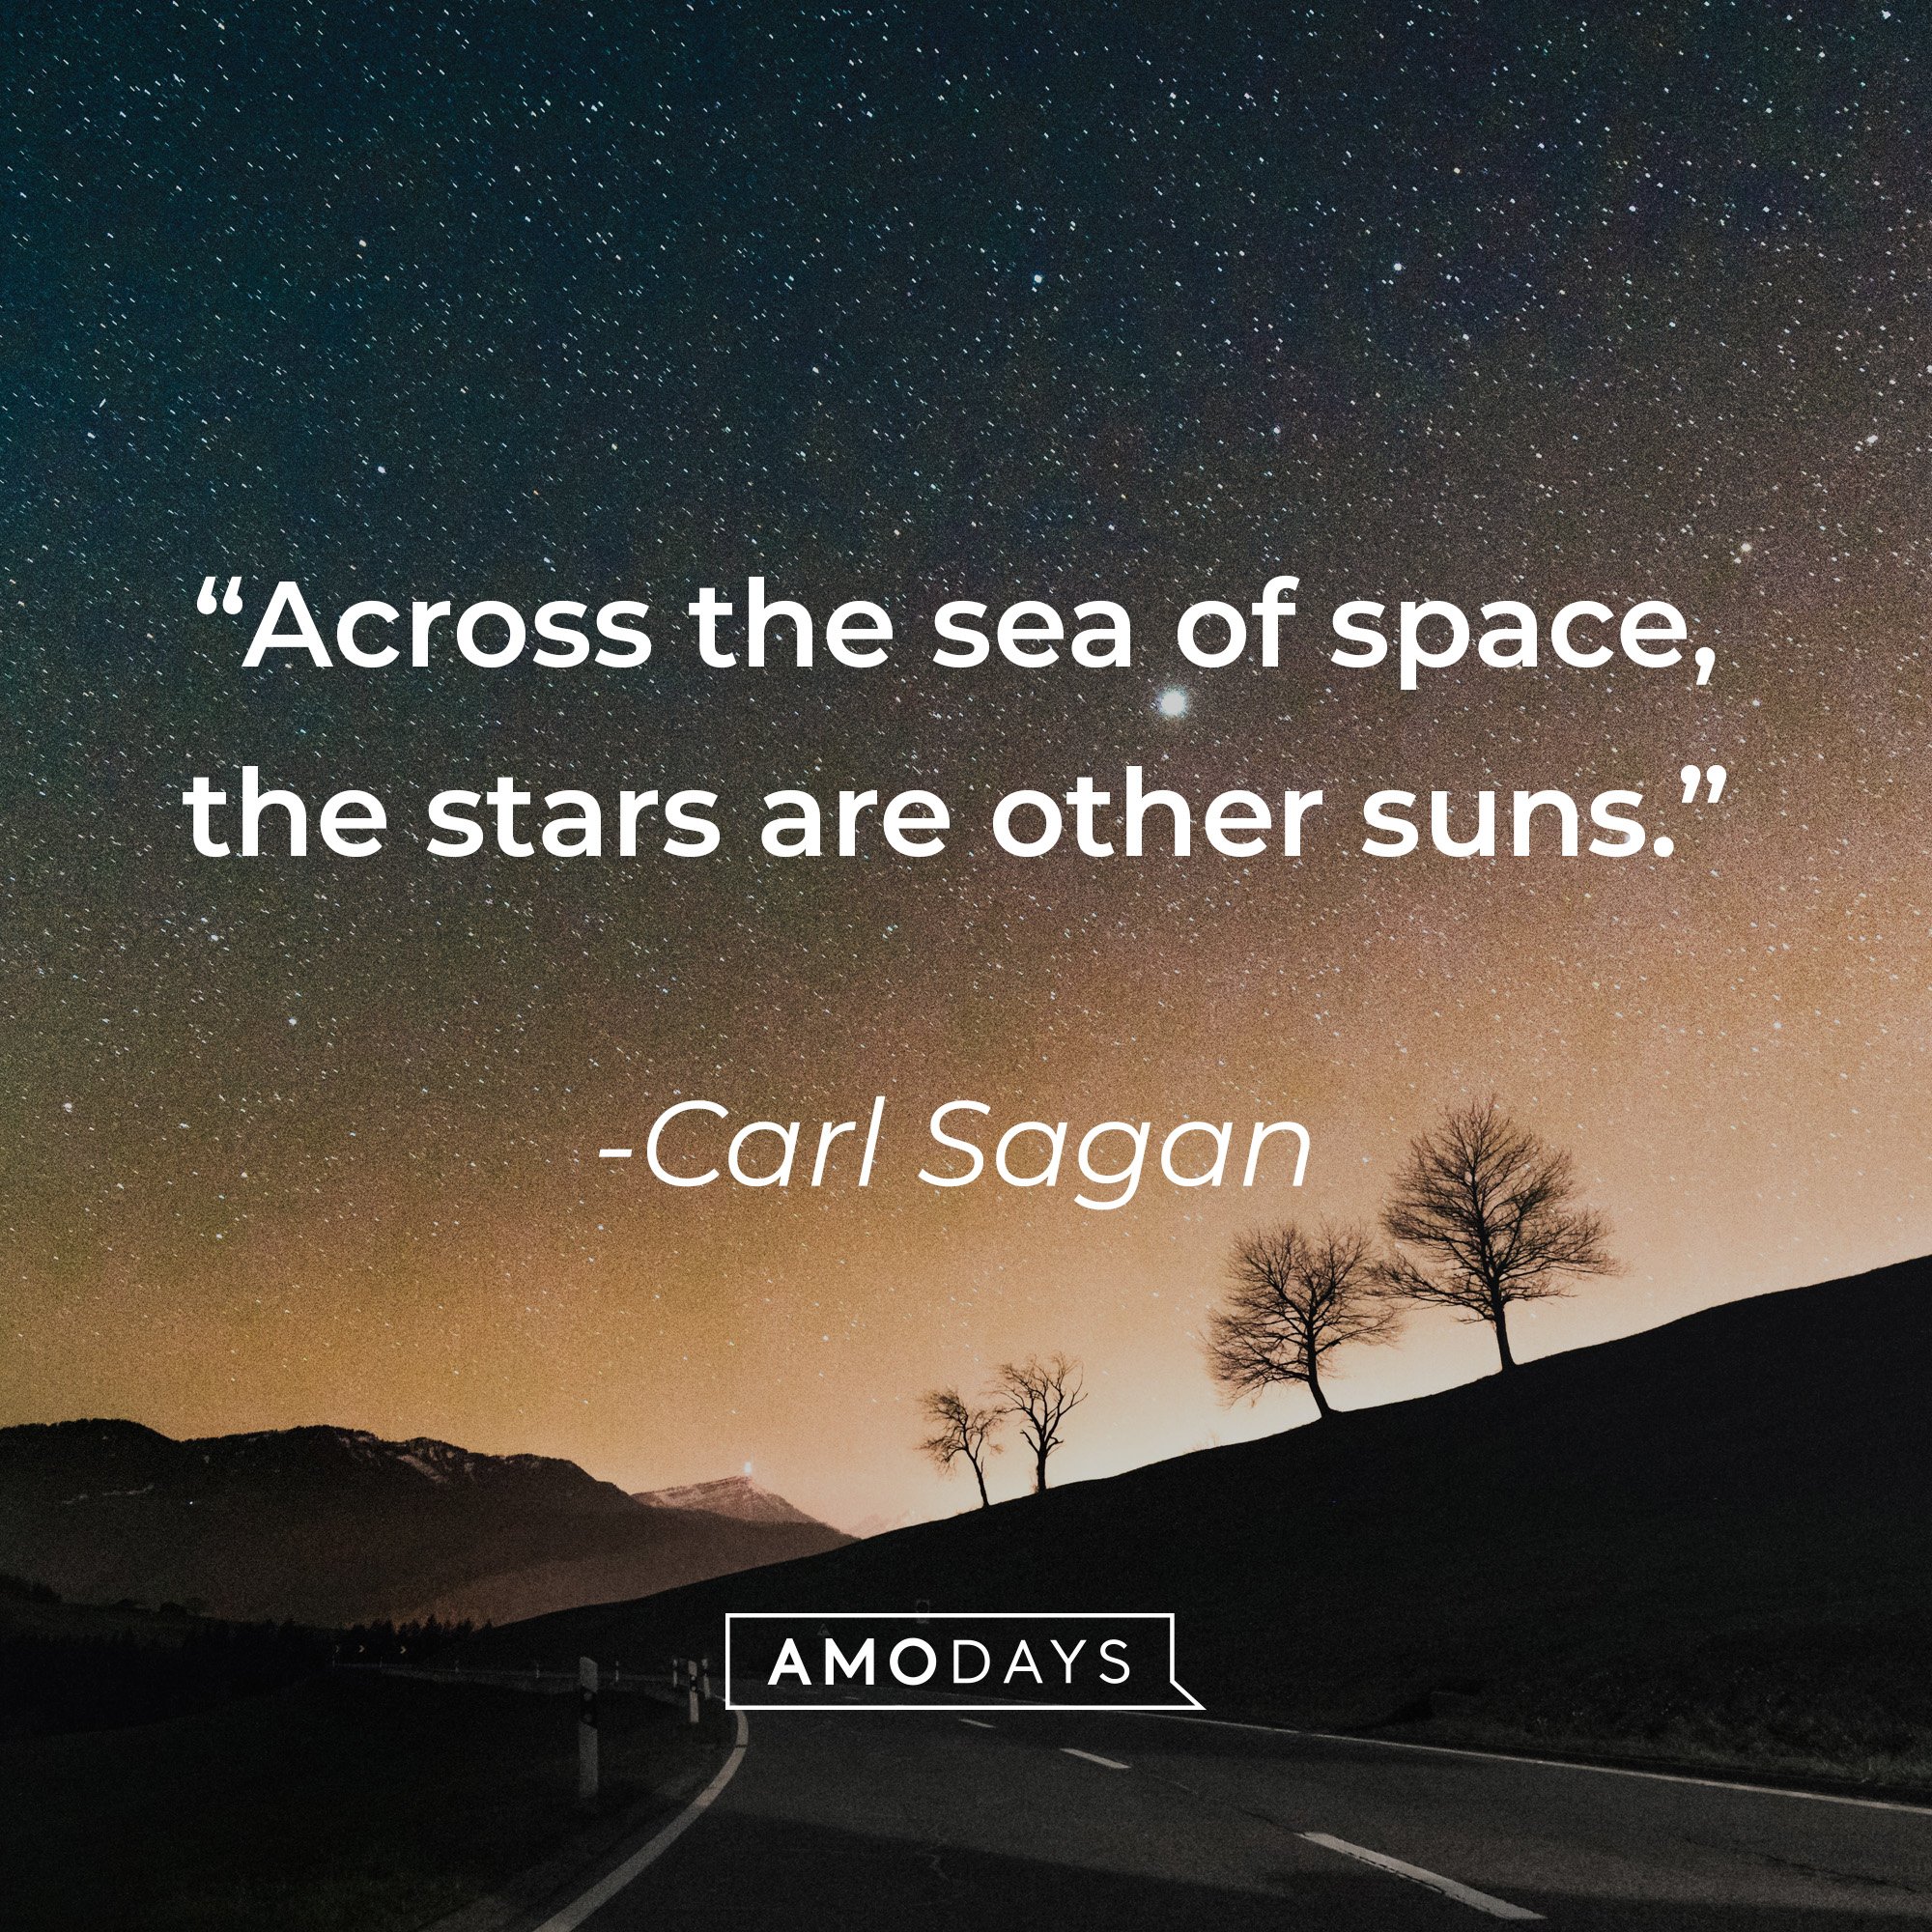 Carl Sagan’s quote: “Across the sea of space, the stars are other suns.” | Image: AmoDays